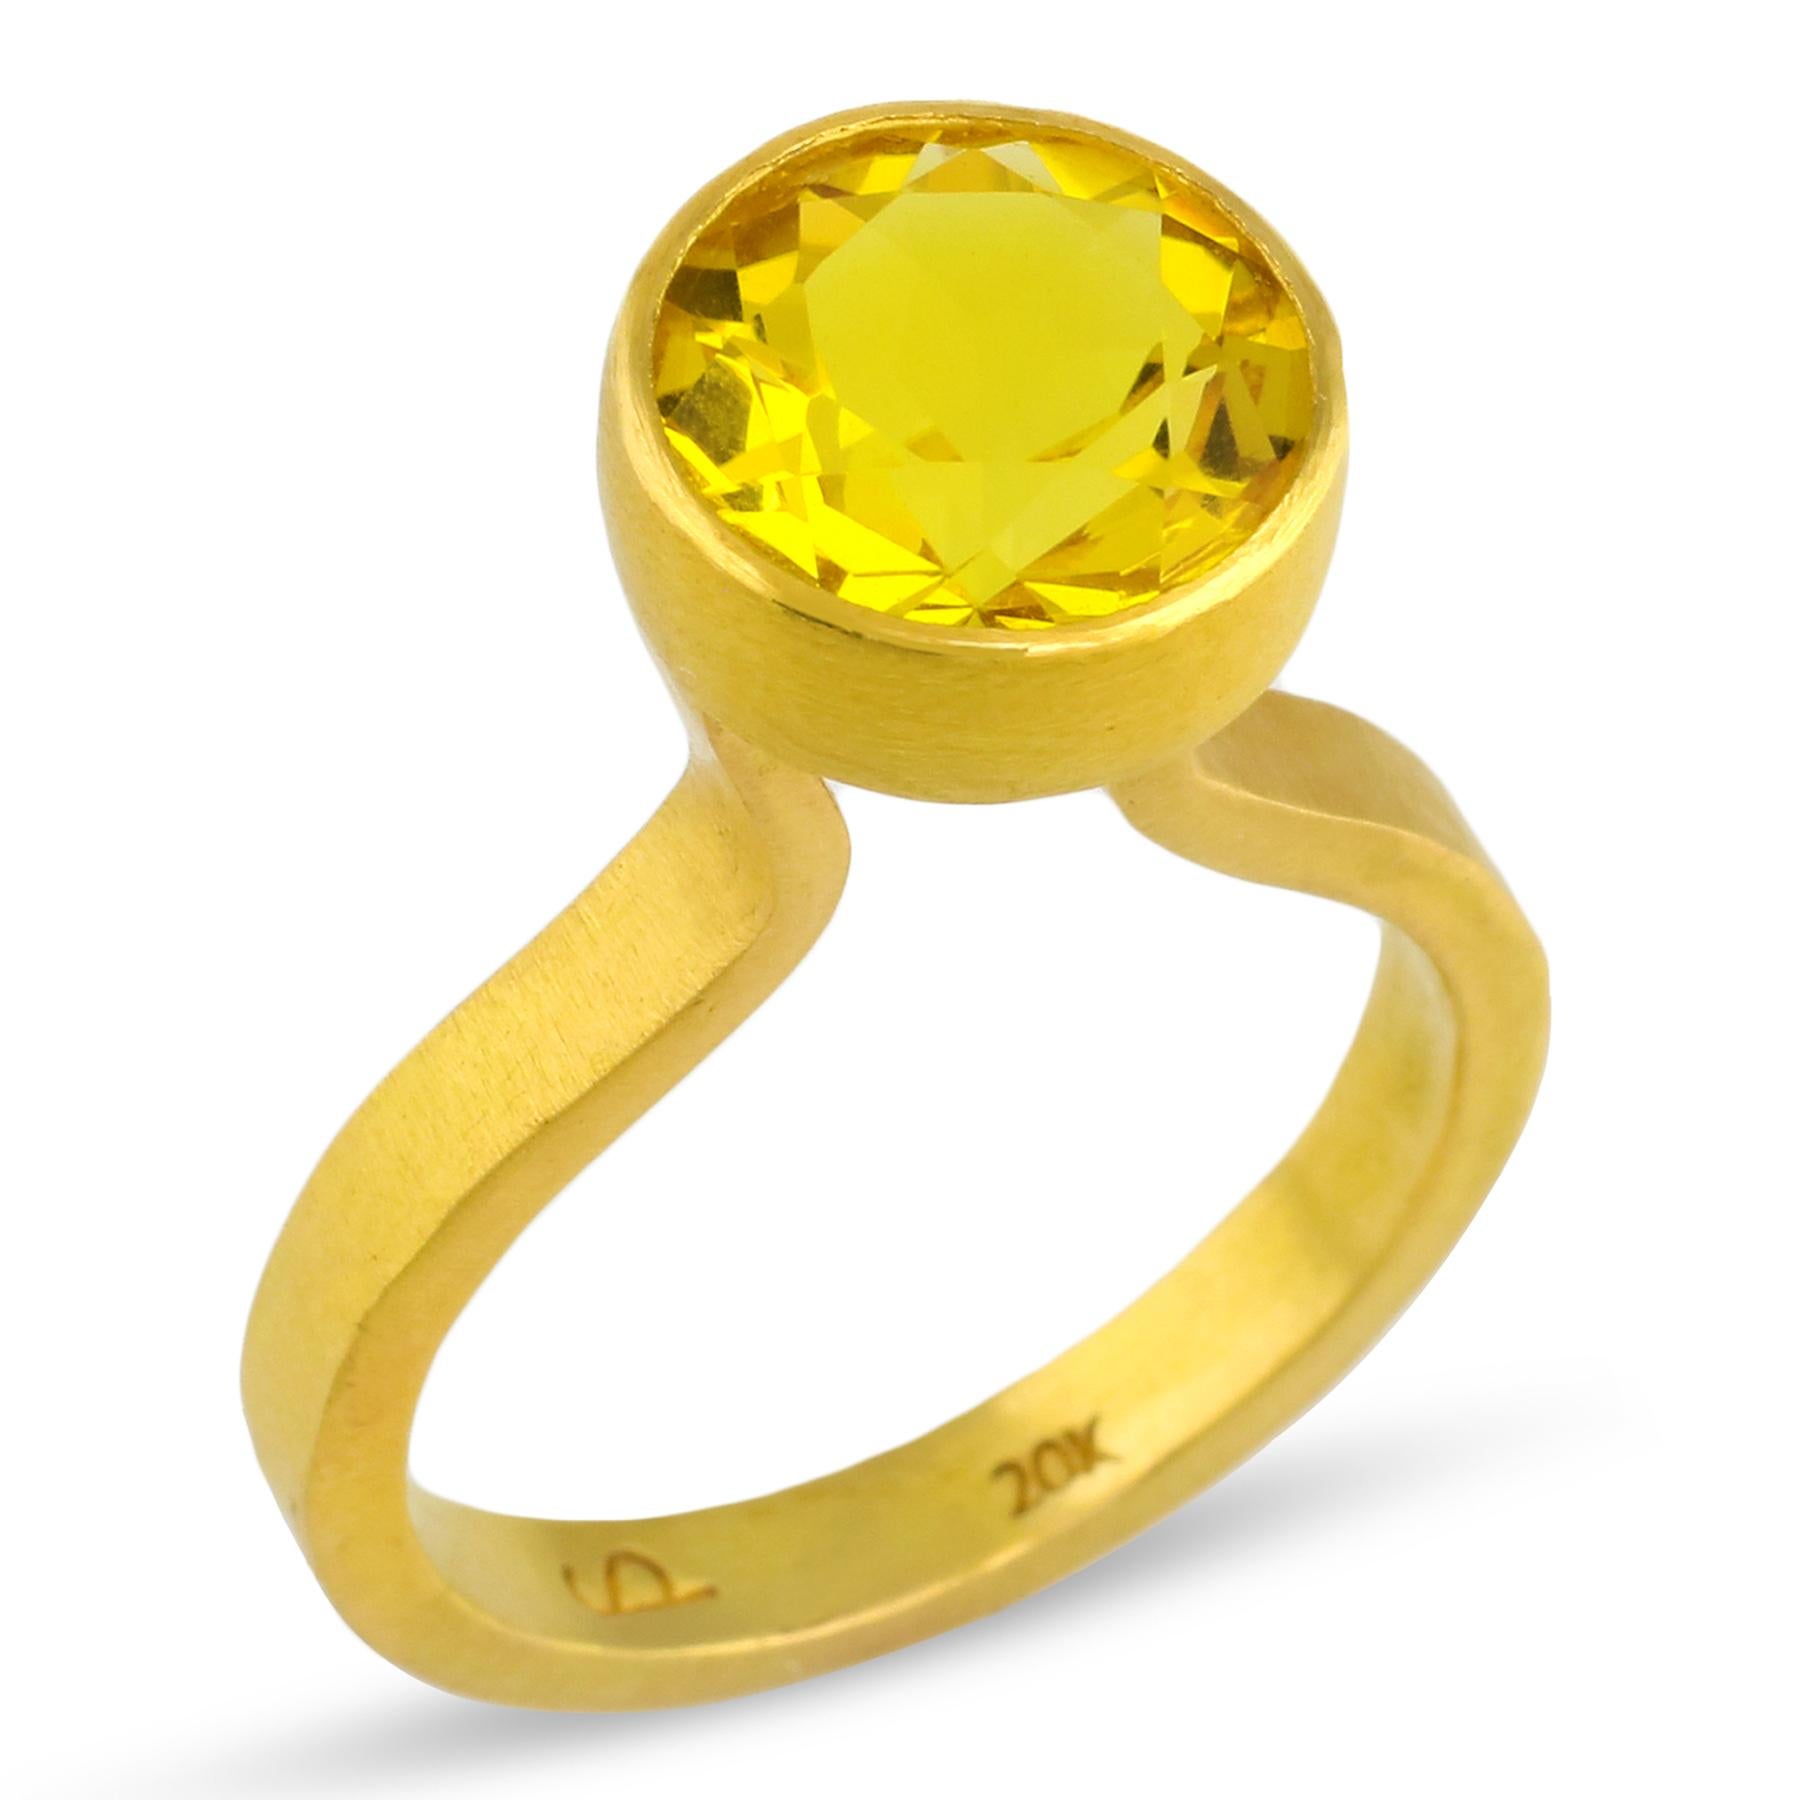 Artisan PHILIPPE SPENCER 3.25 Ct. Lemon Color Citrine in 22K and 20K Gold Statement Ring For Sale